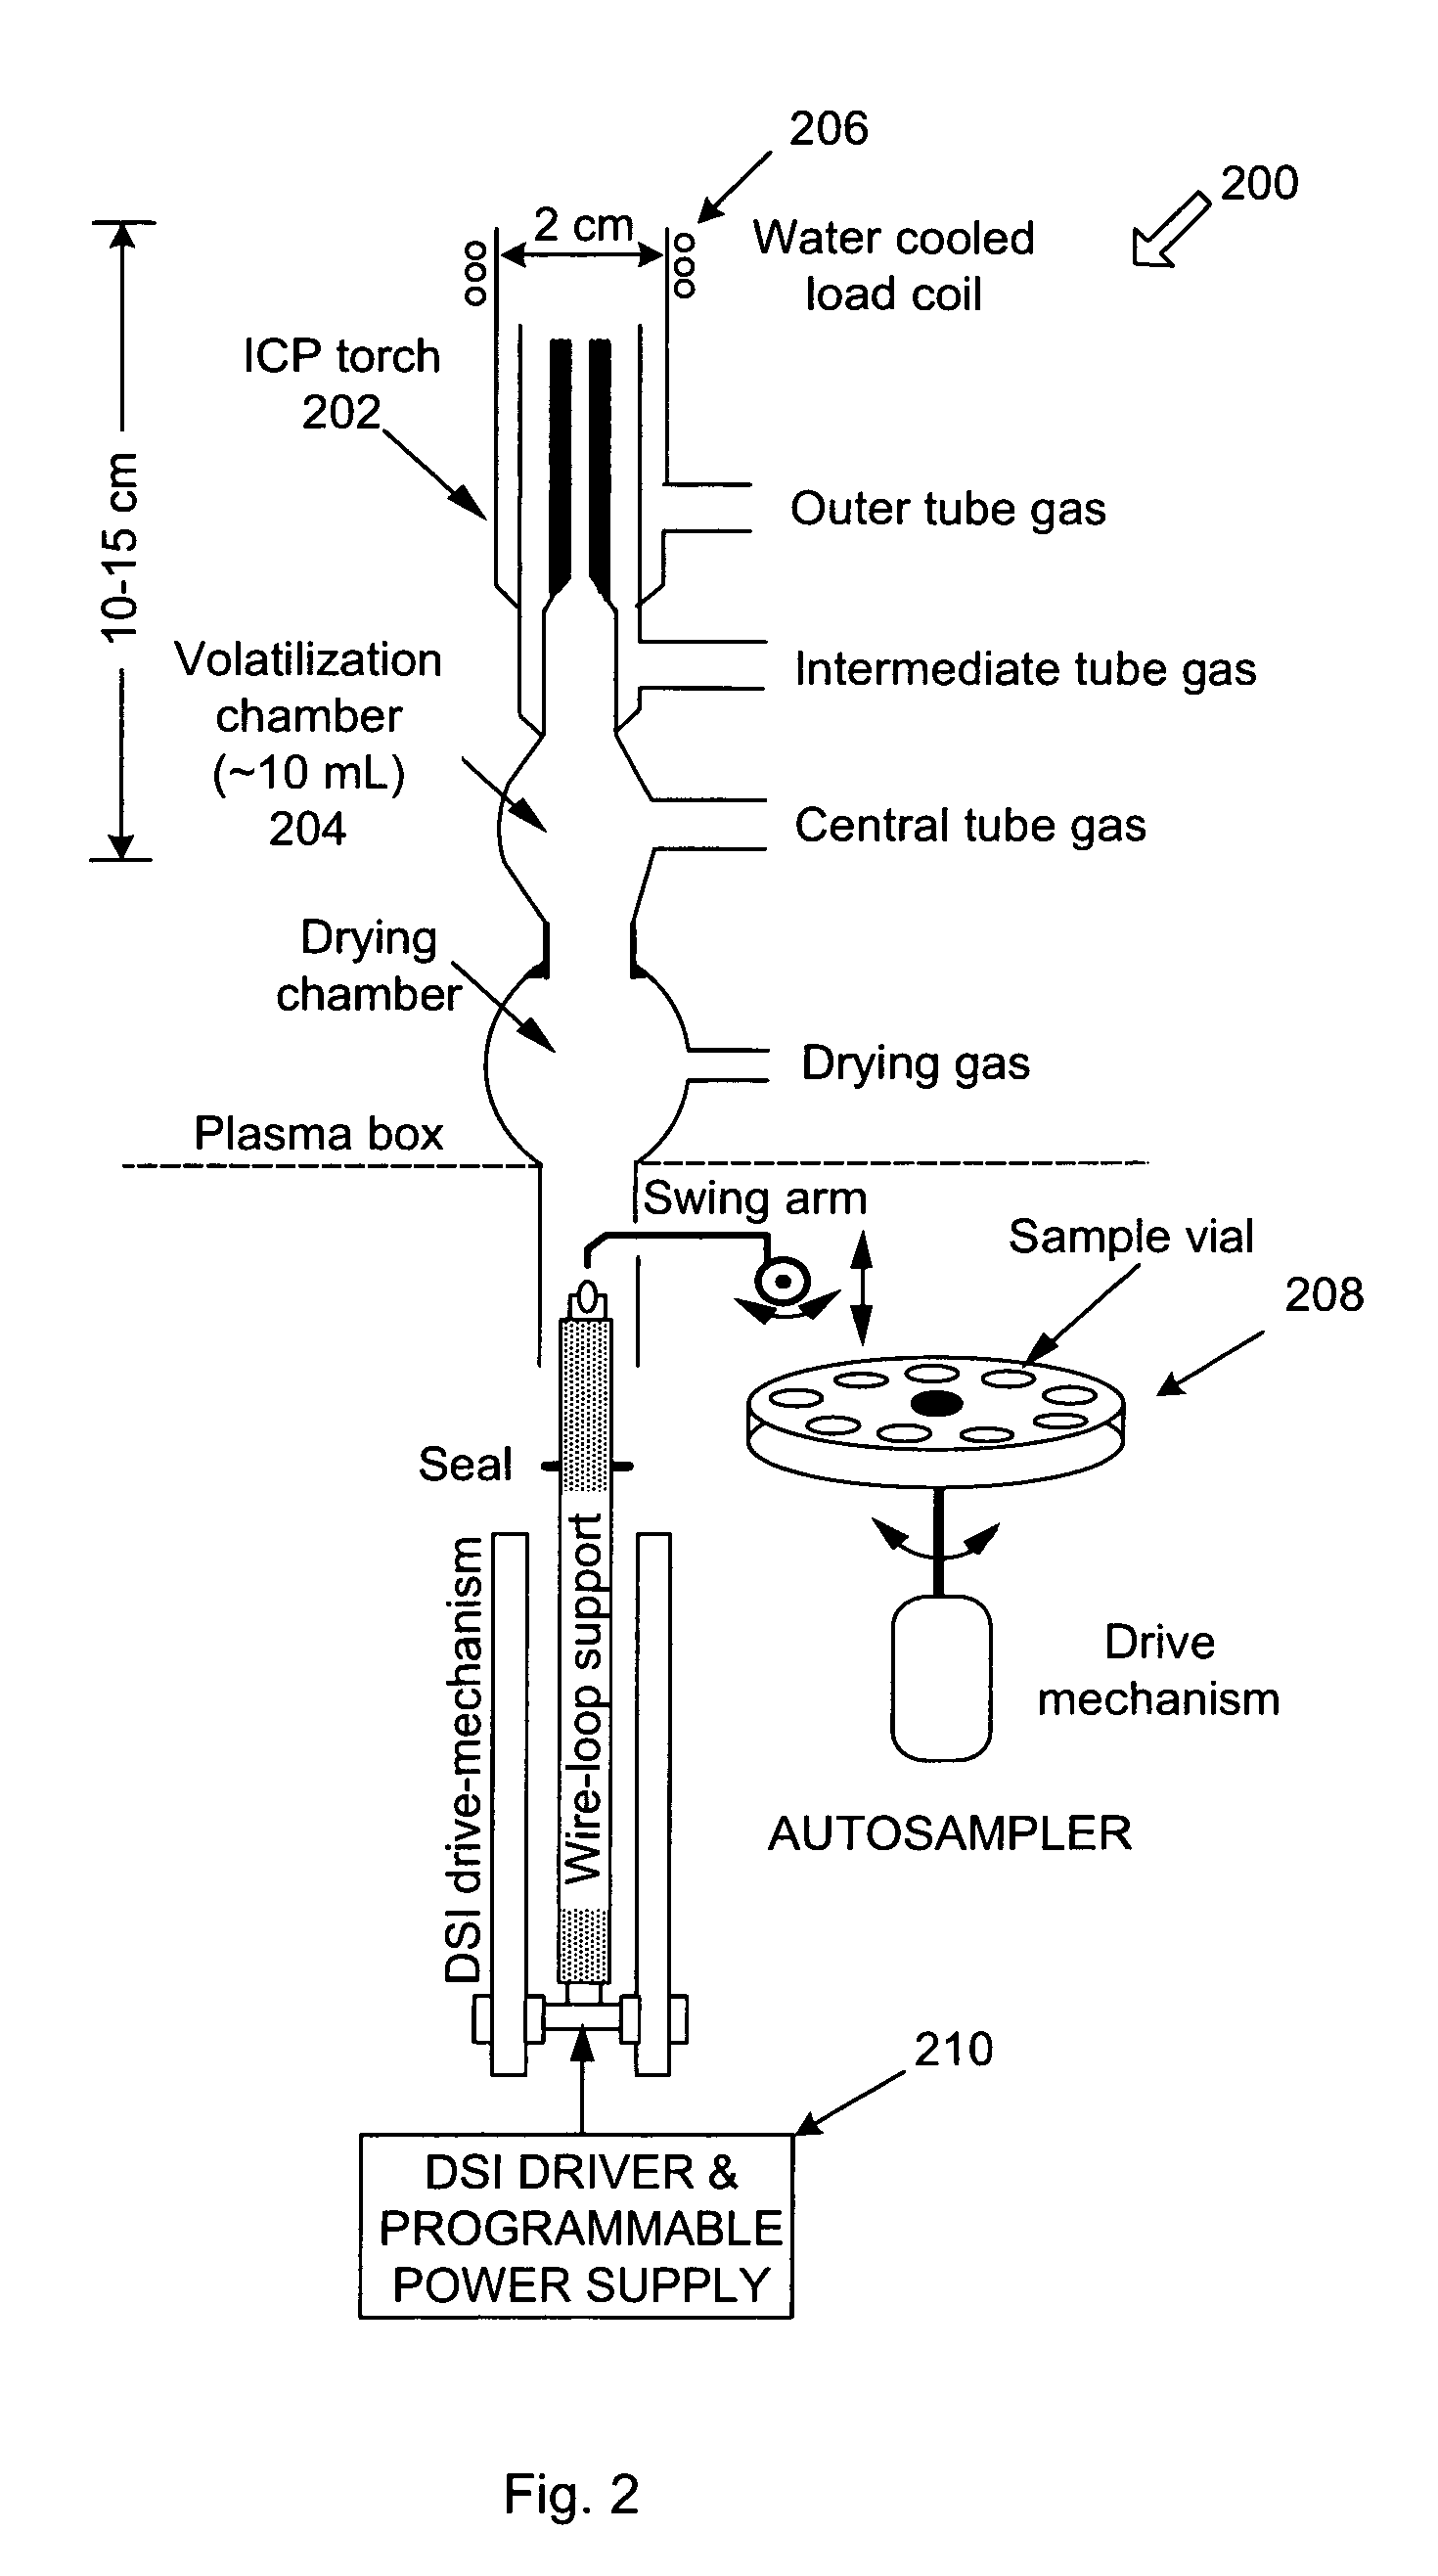 Miniaturized source devices for optical and mass spectrometry